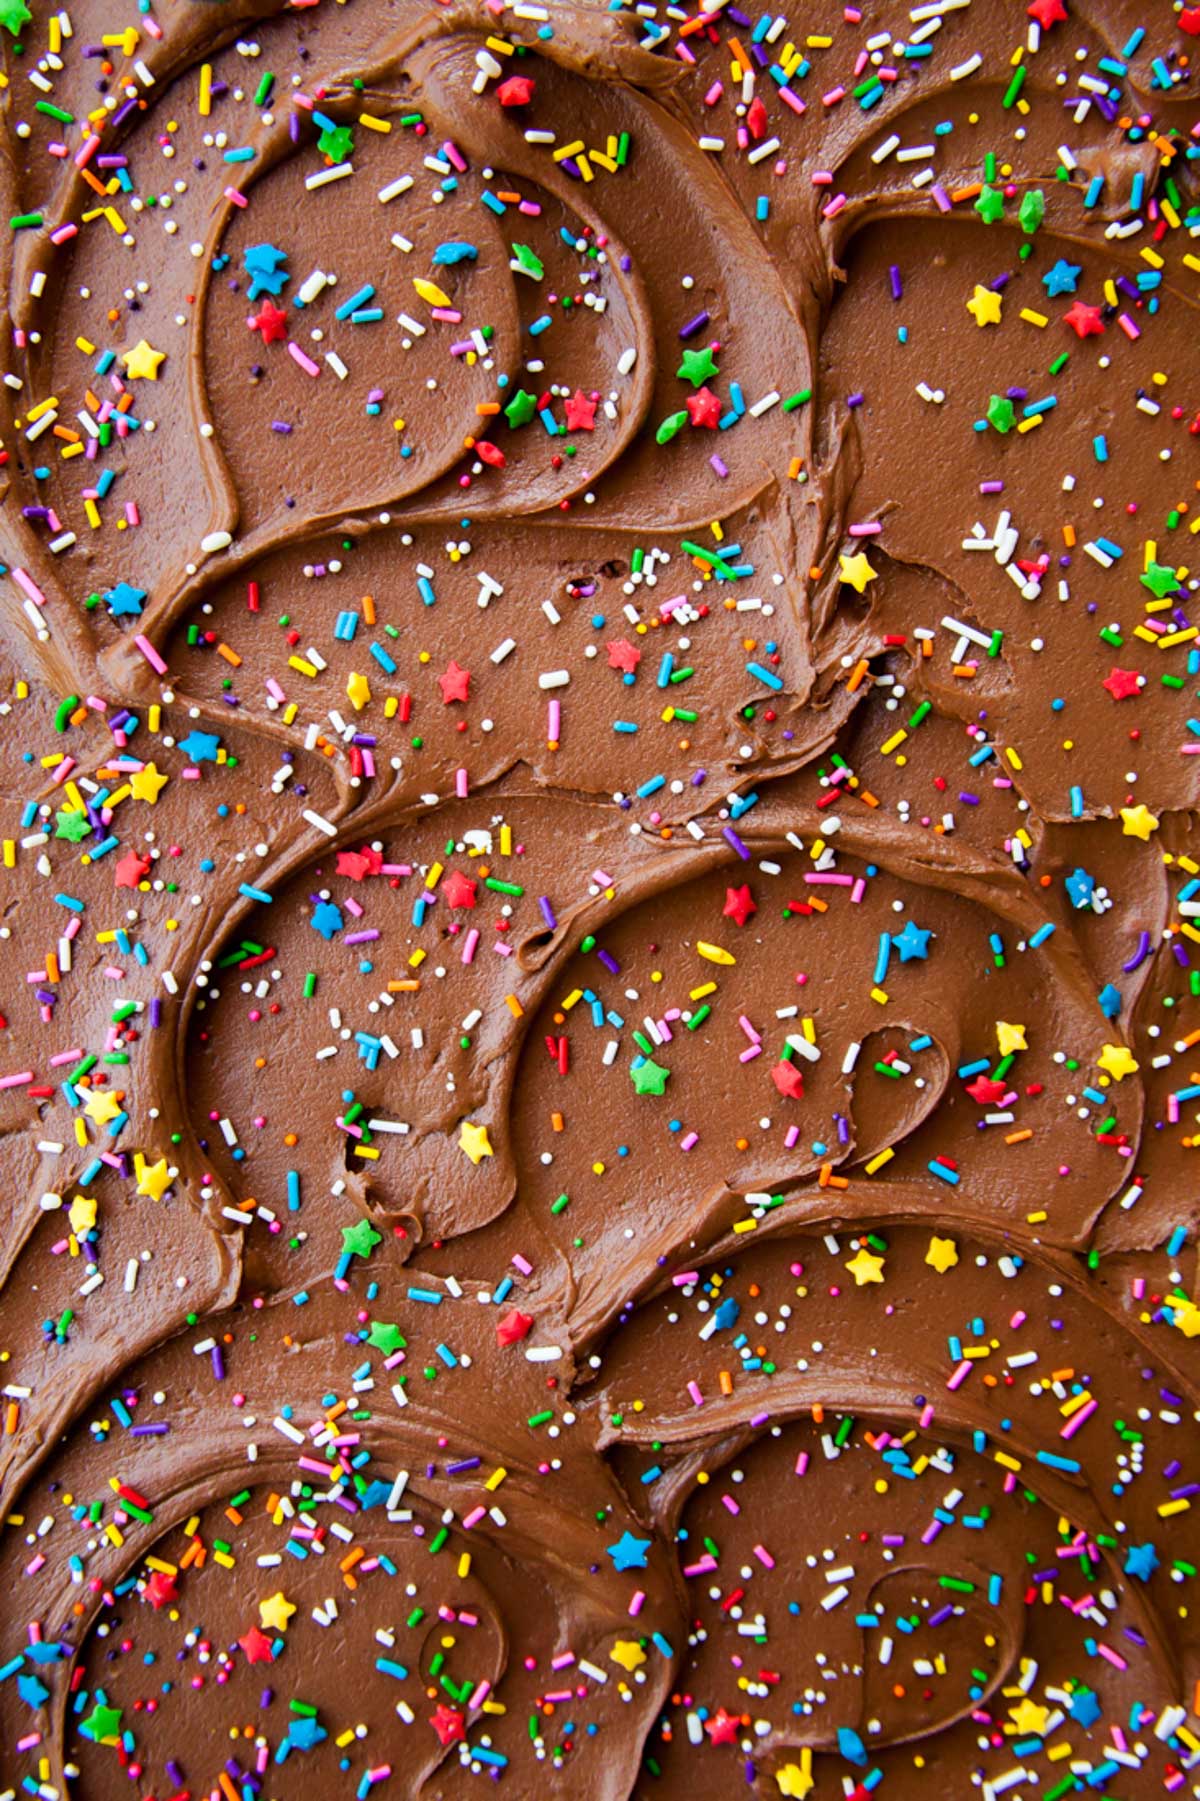 A close-up of fudge frosting with rainbow sprinkles on top